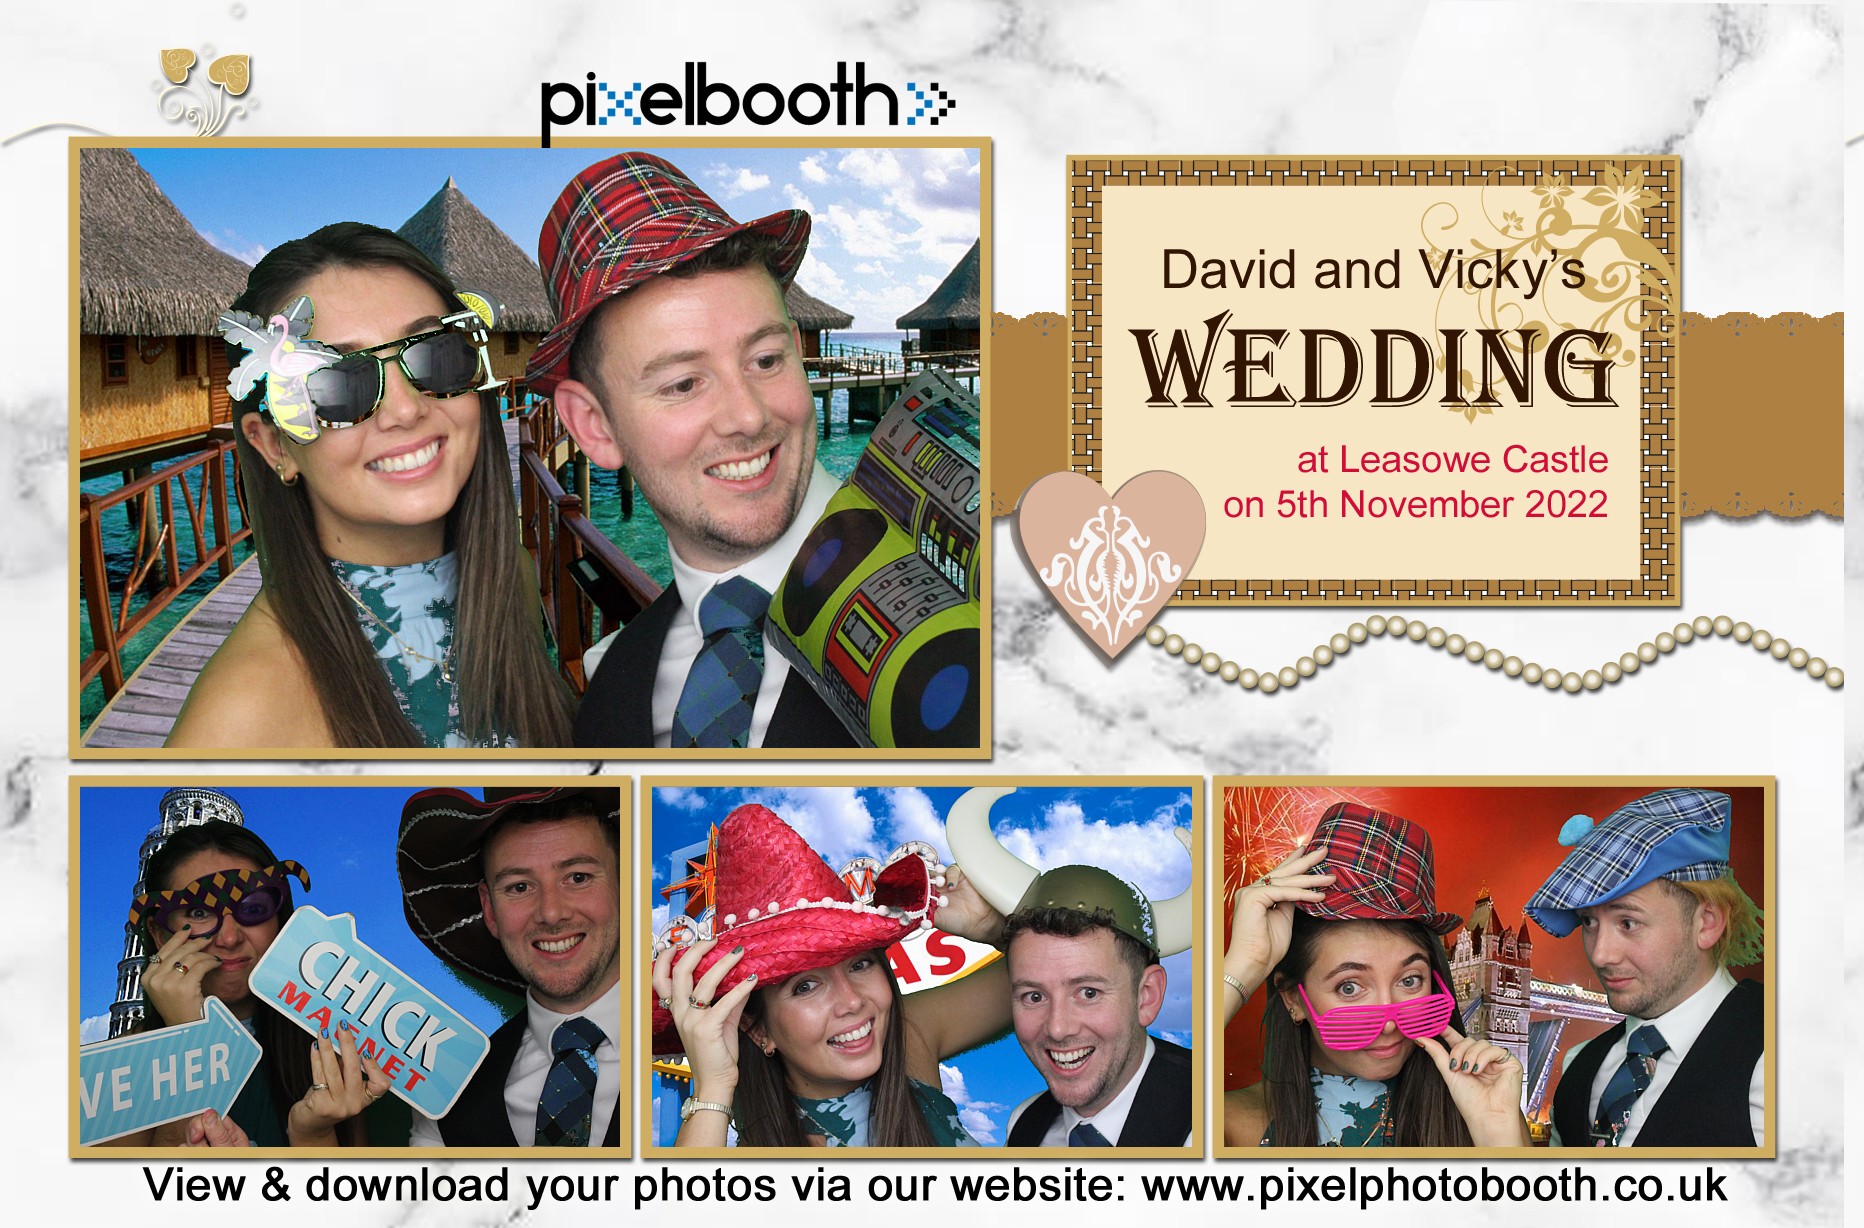 5th Nov 2022: David and Vicky's Wedding at Leasowe Castle